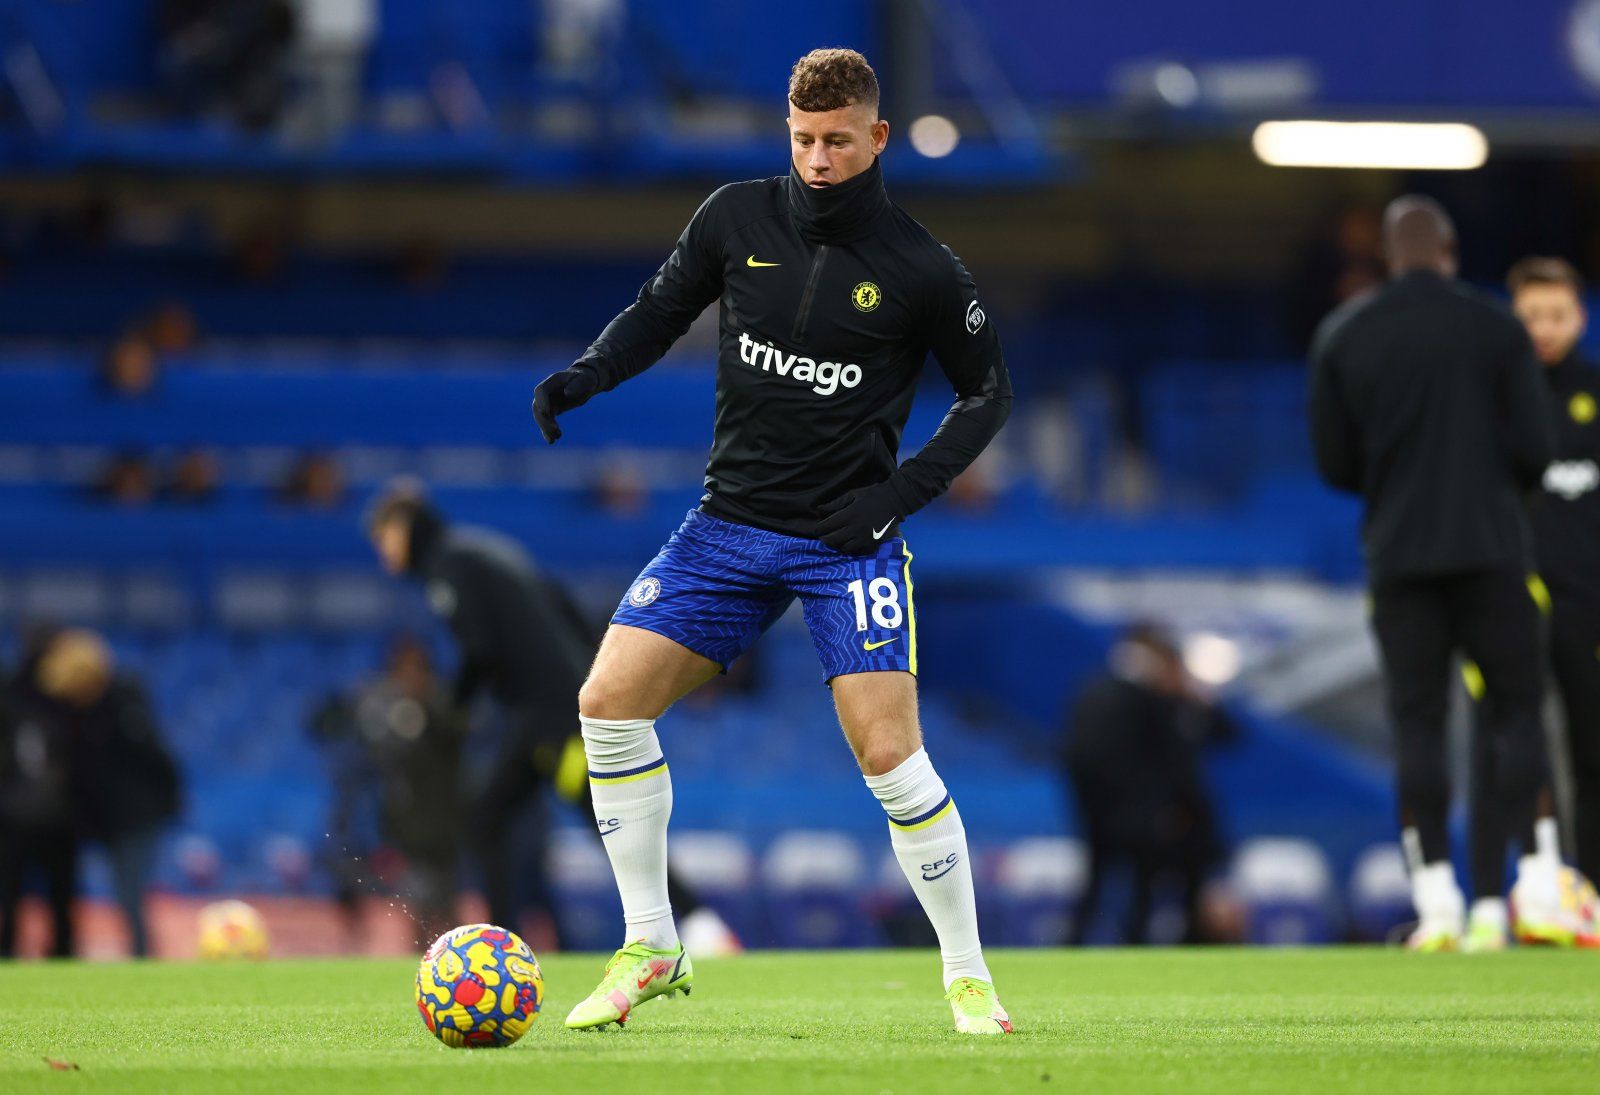 Celtic: Ross Barkley’s agent ‘working’ to find new club -Celtic News